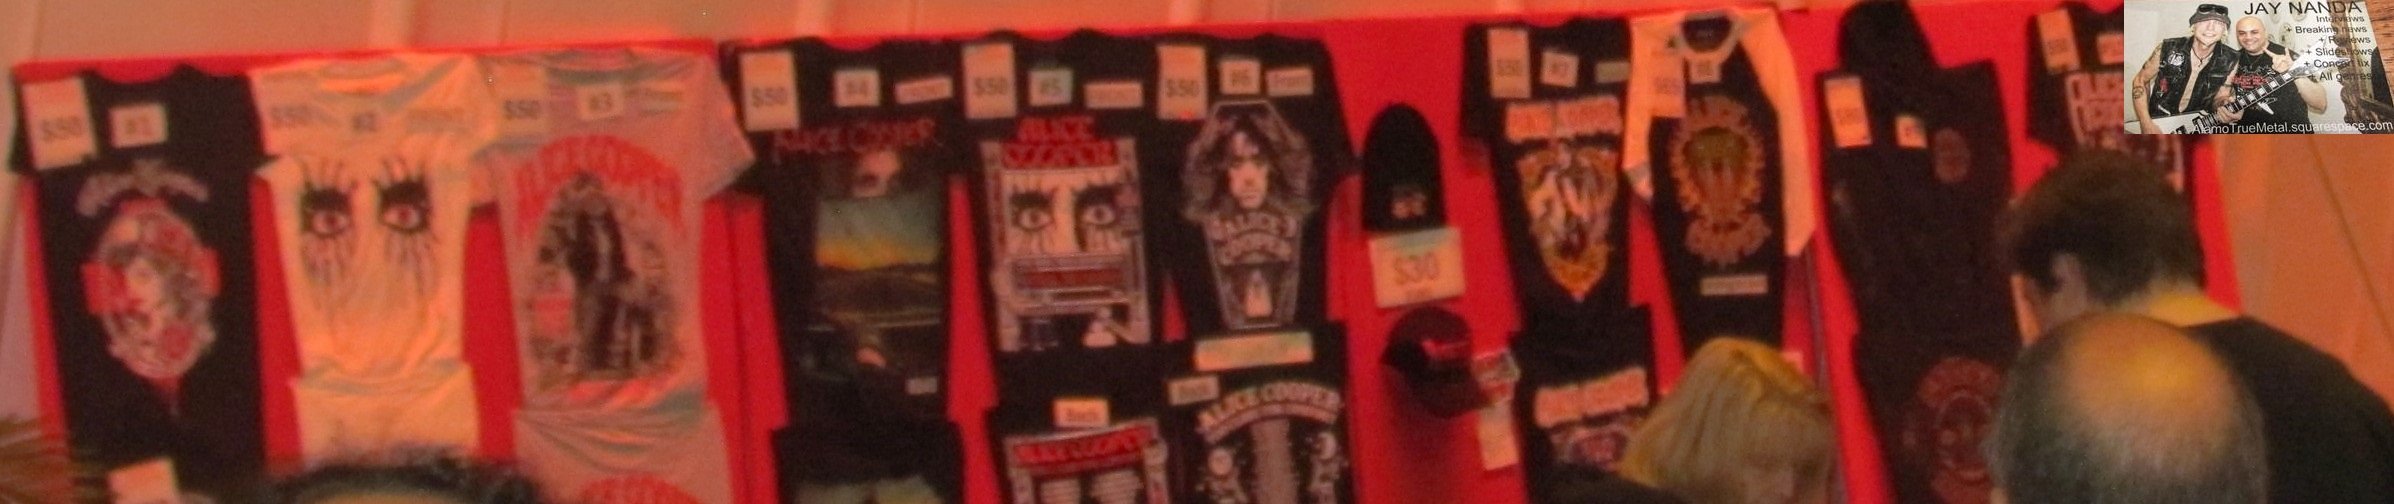  A sample of Cooper’s merch awaits for purchasing. 